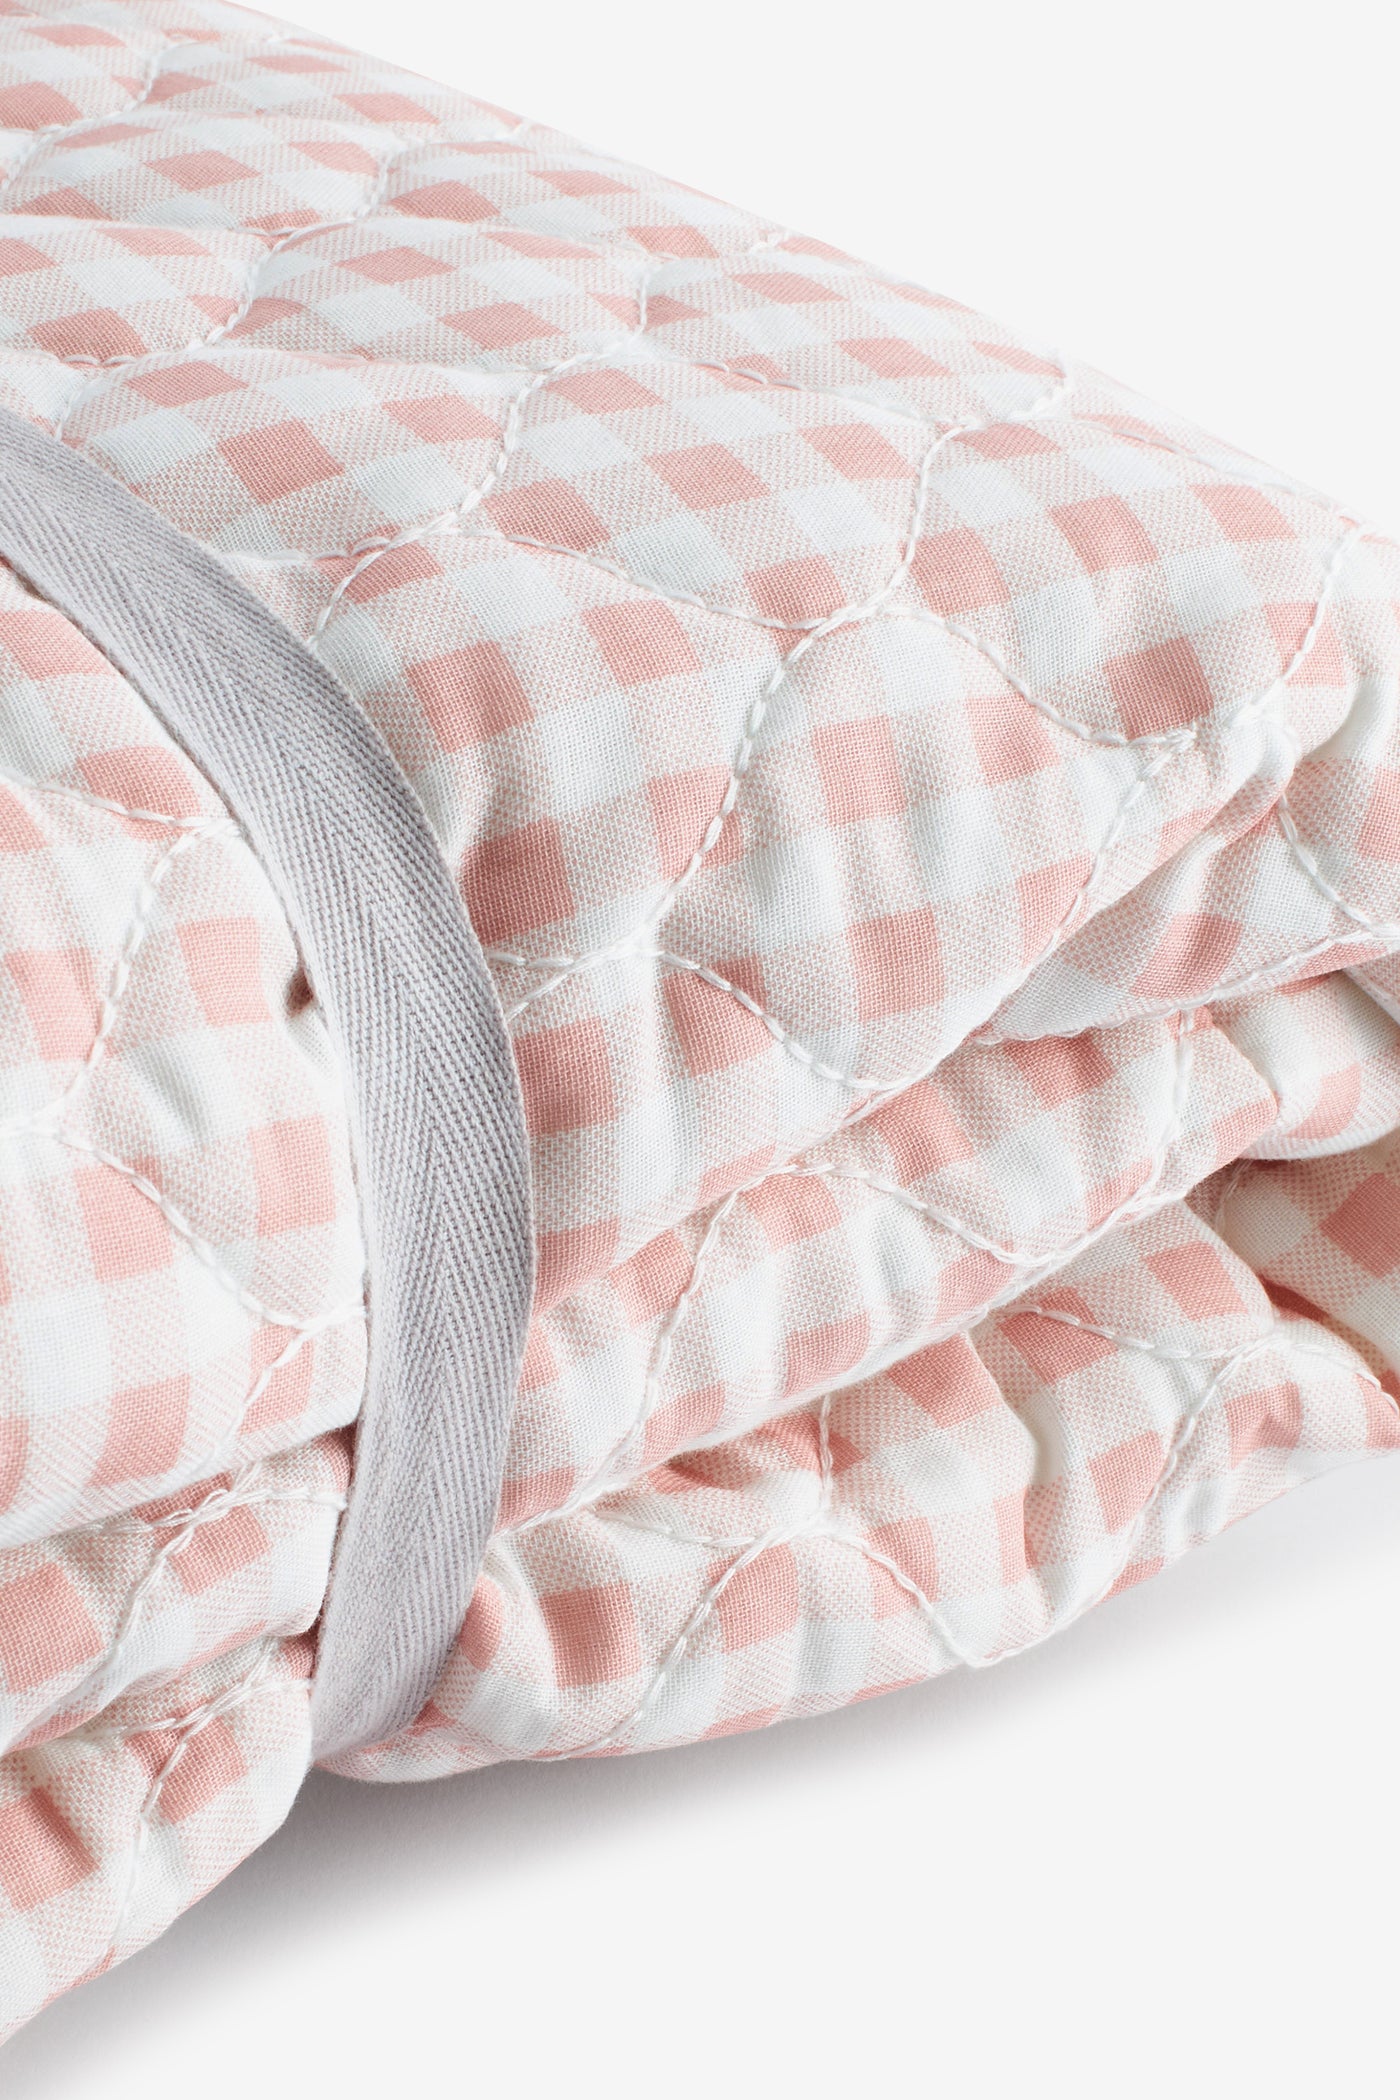 Padded Quilt, rose pink woodland and gingham print